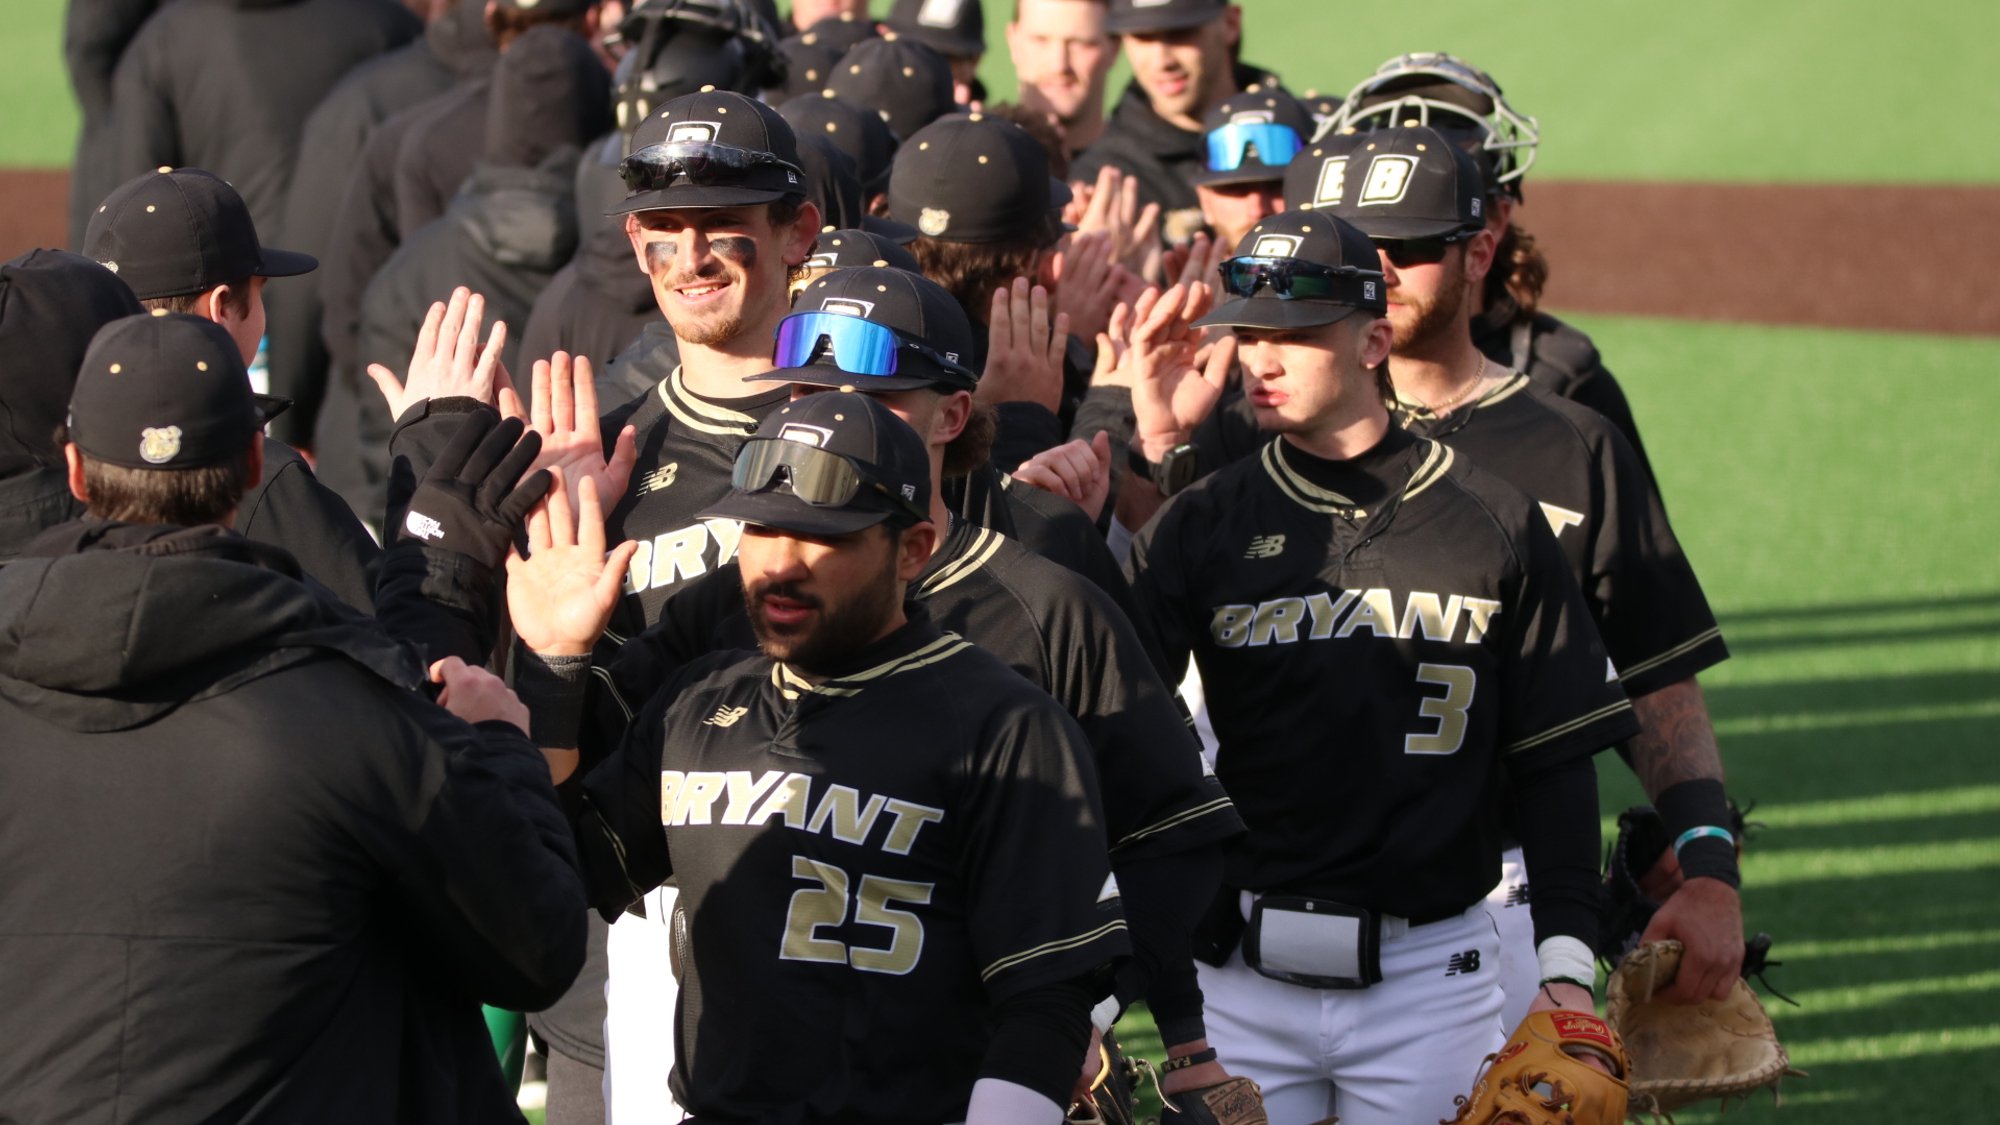 Bryant rallies past Sacred Heart, 7-4, on Tuesday